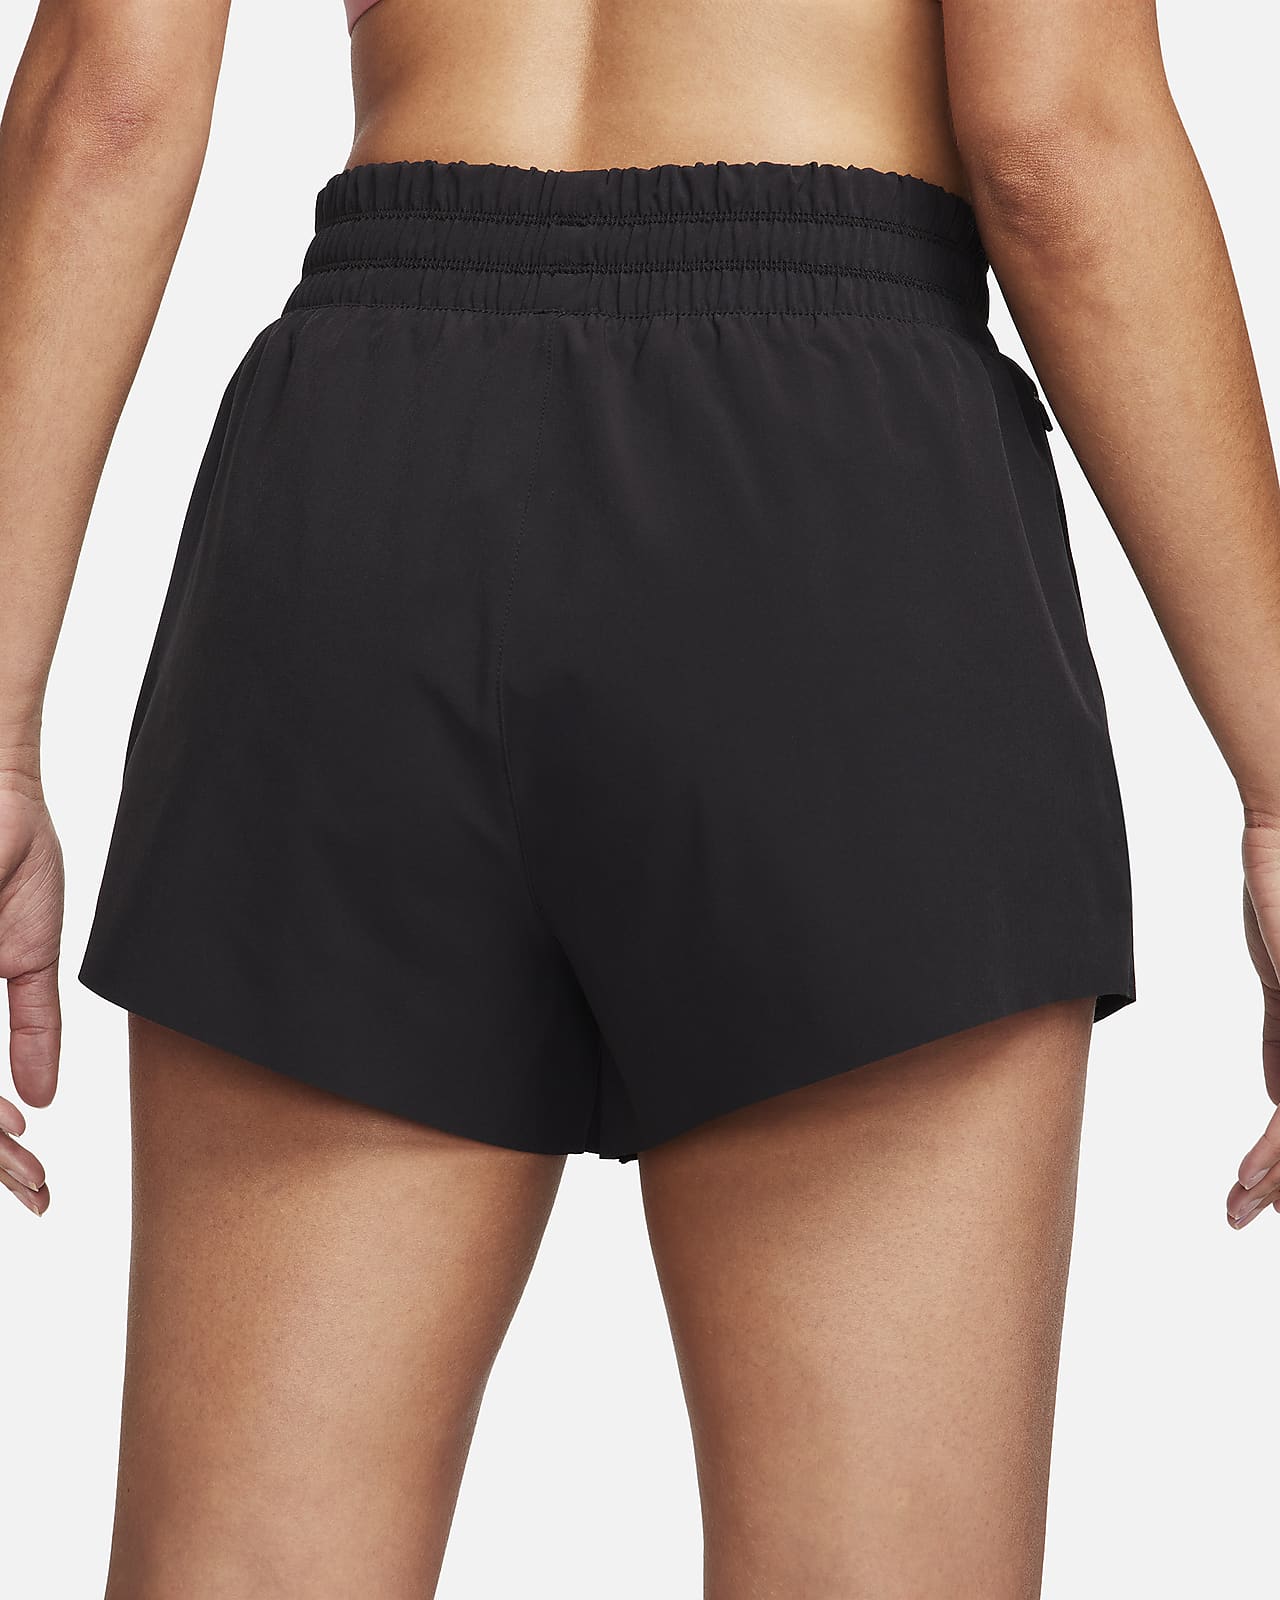 Womens Running Shorts Athletic Workout High Waisted Quick Dry gym Shorts  with Pocket